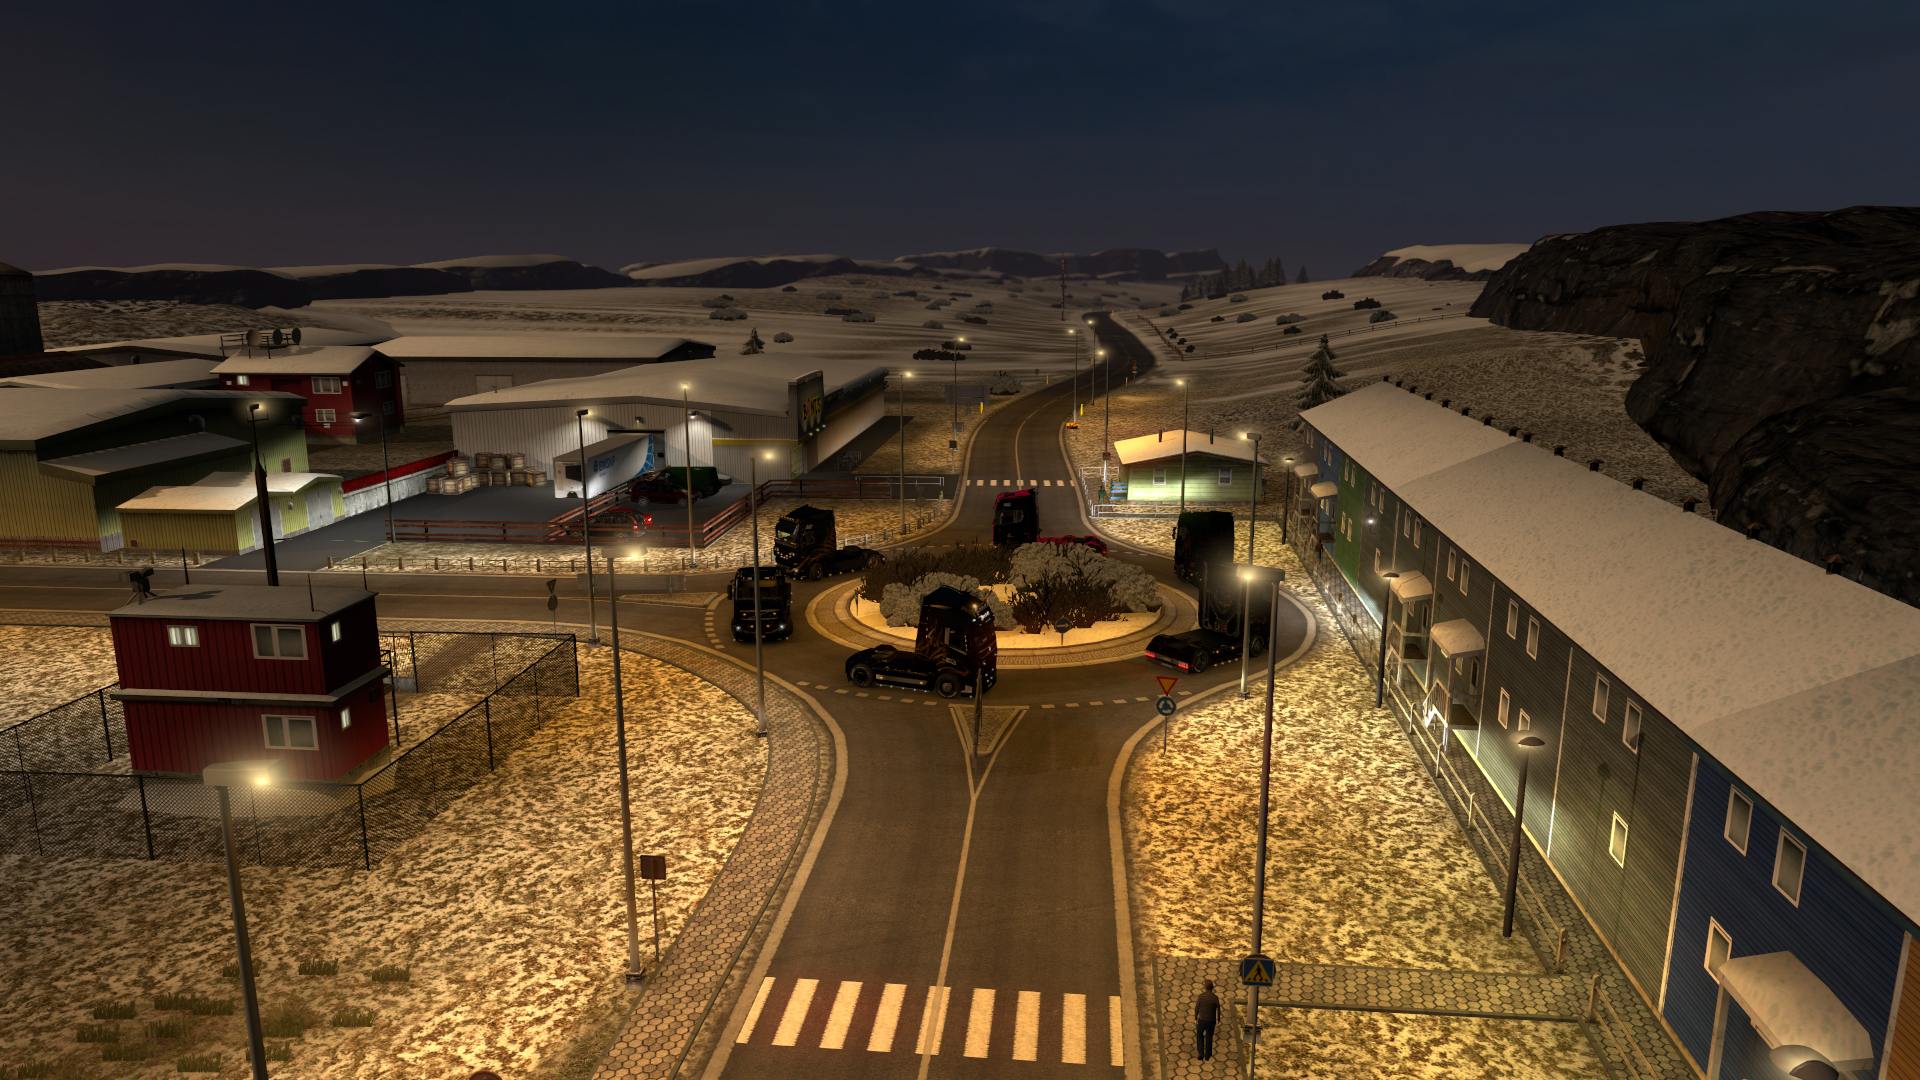 ets2_20210321_004044_00.png